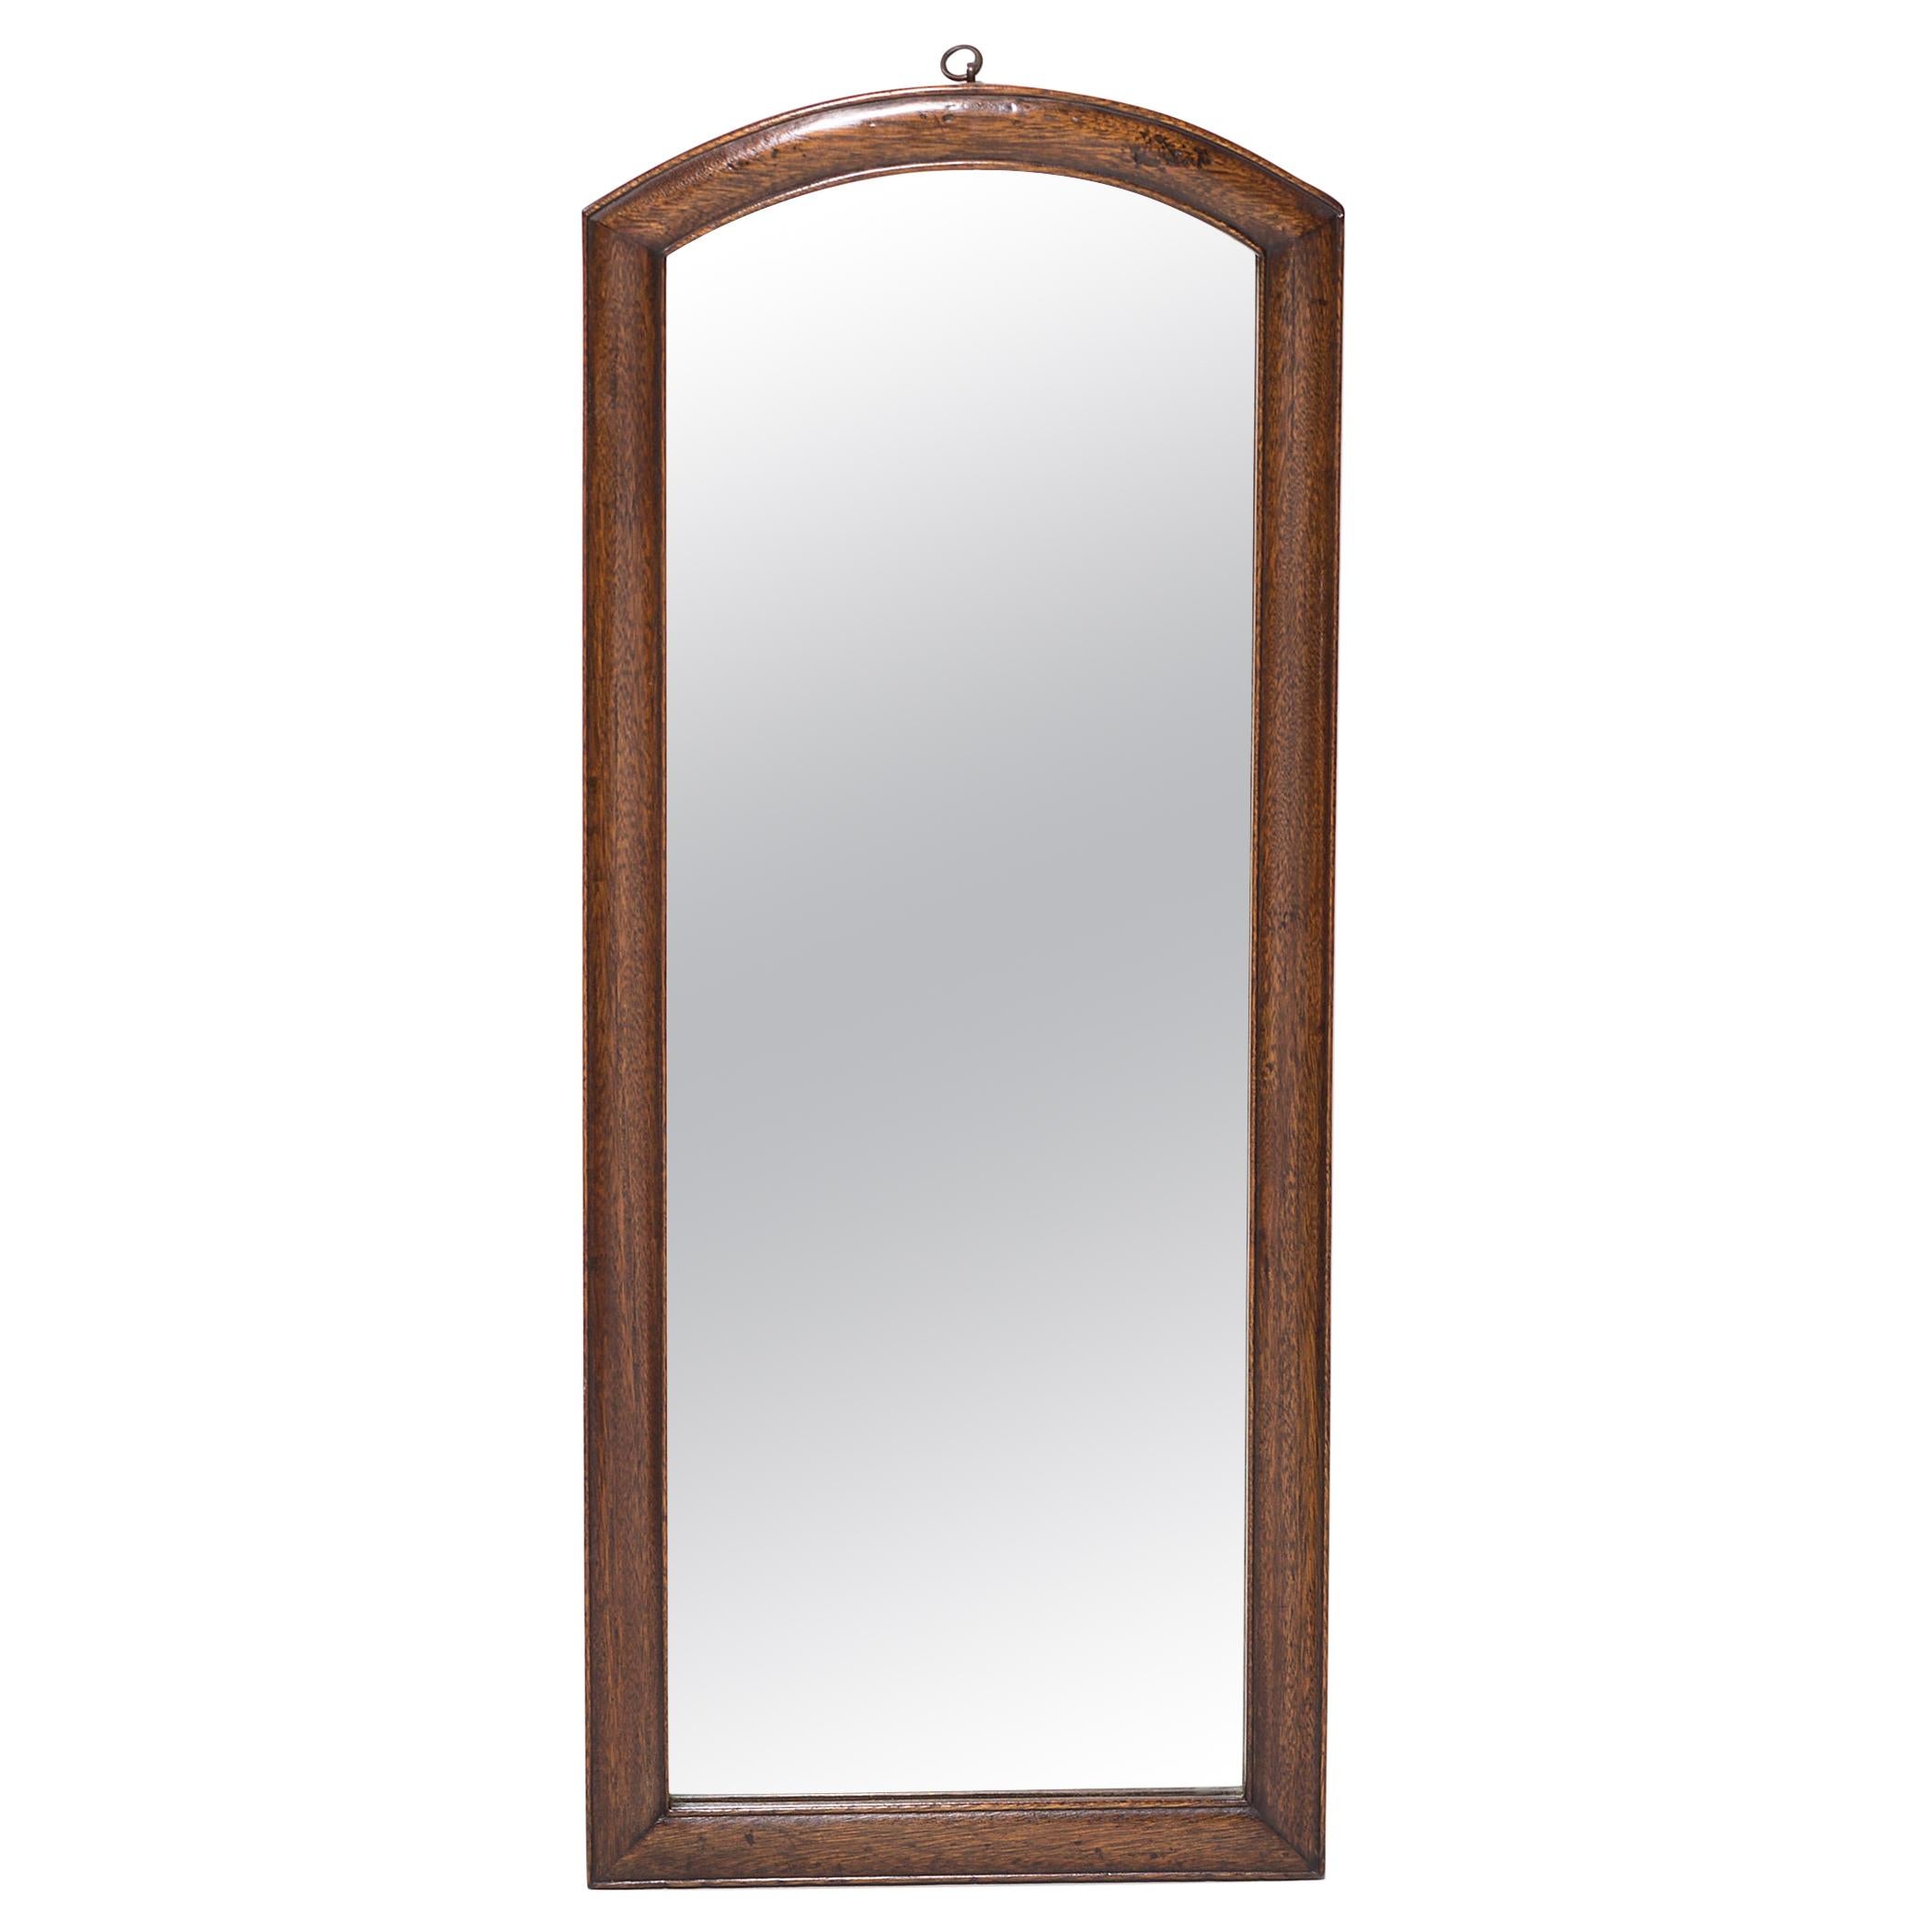 Chinese Art Deco Mirror, c. 1930 For Sale